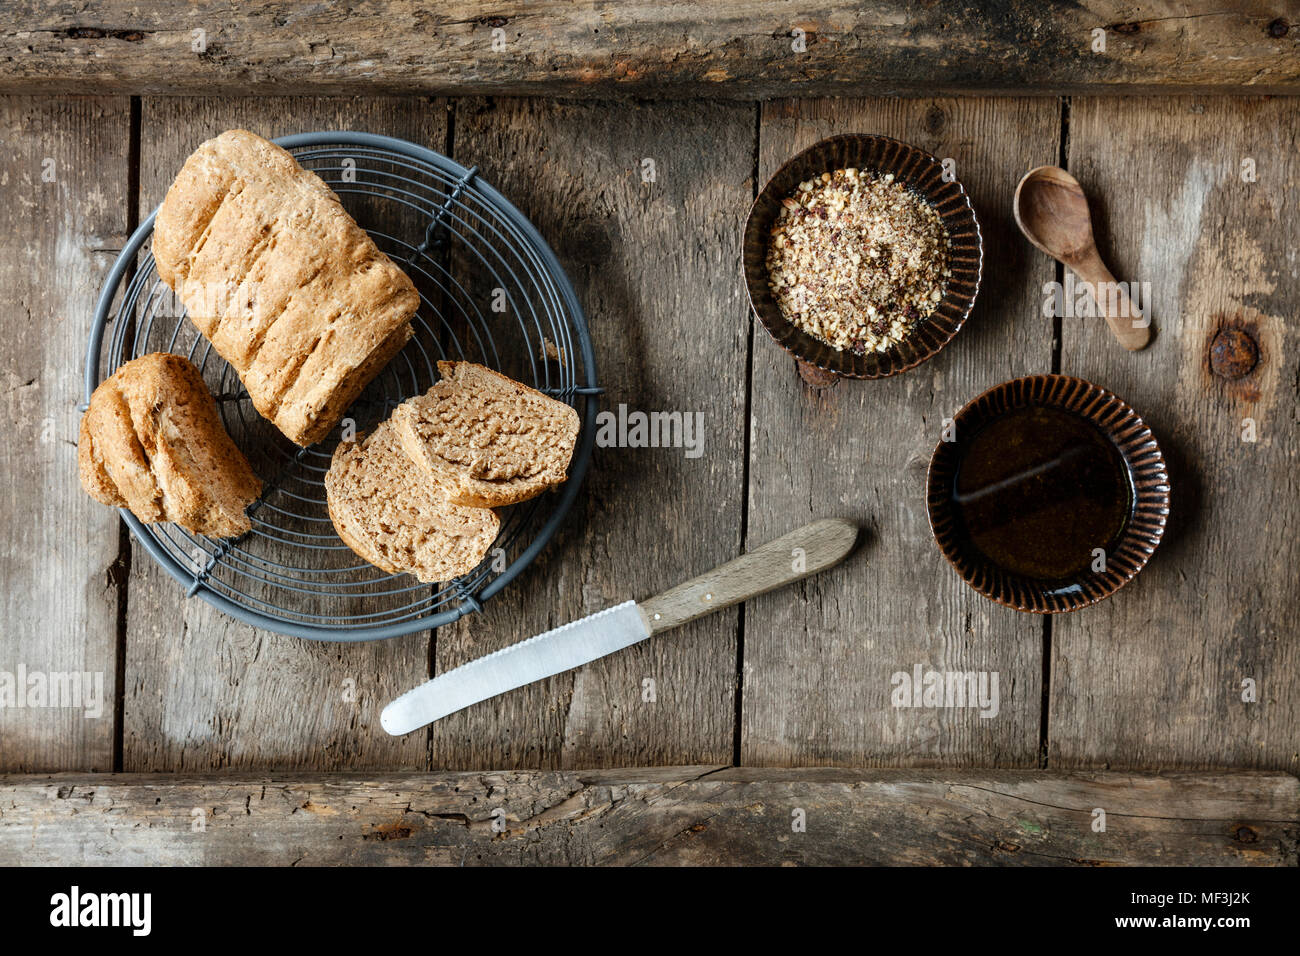 Traditionally Egyptian nut spice blend dukkah with bread and olive oil Stock Photo